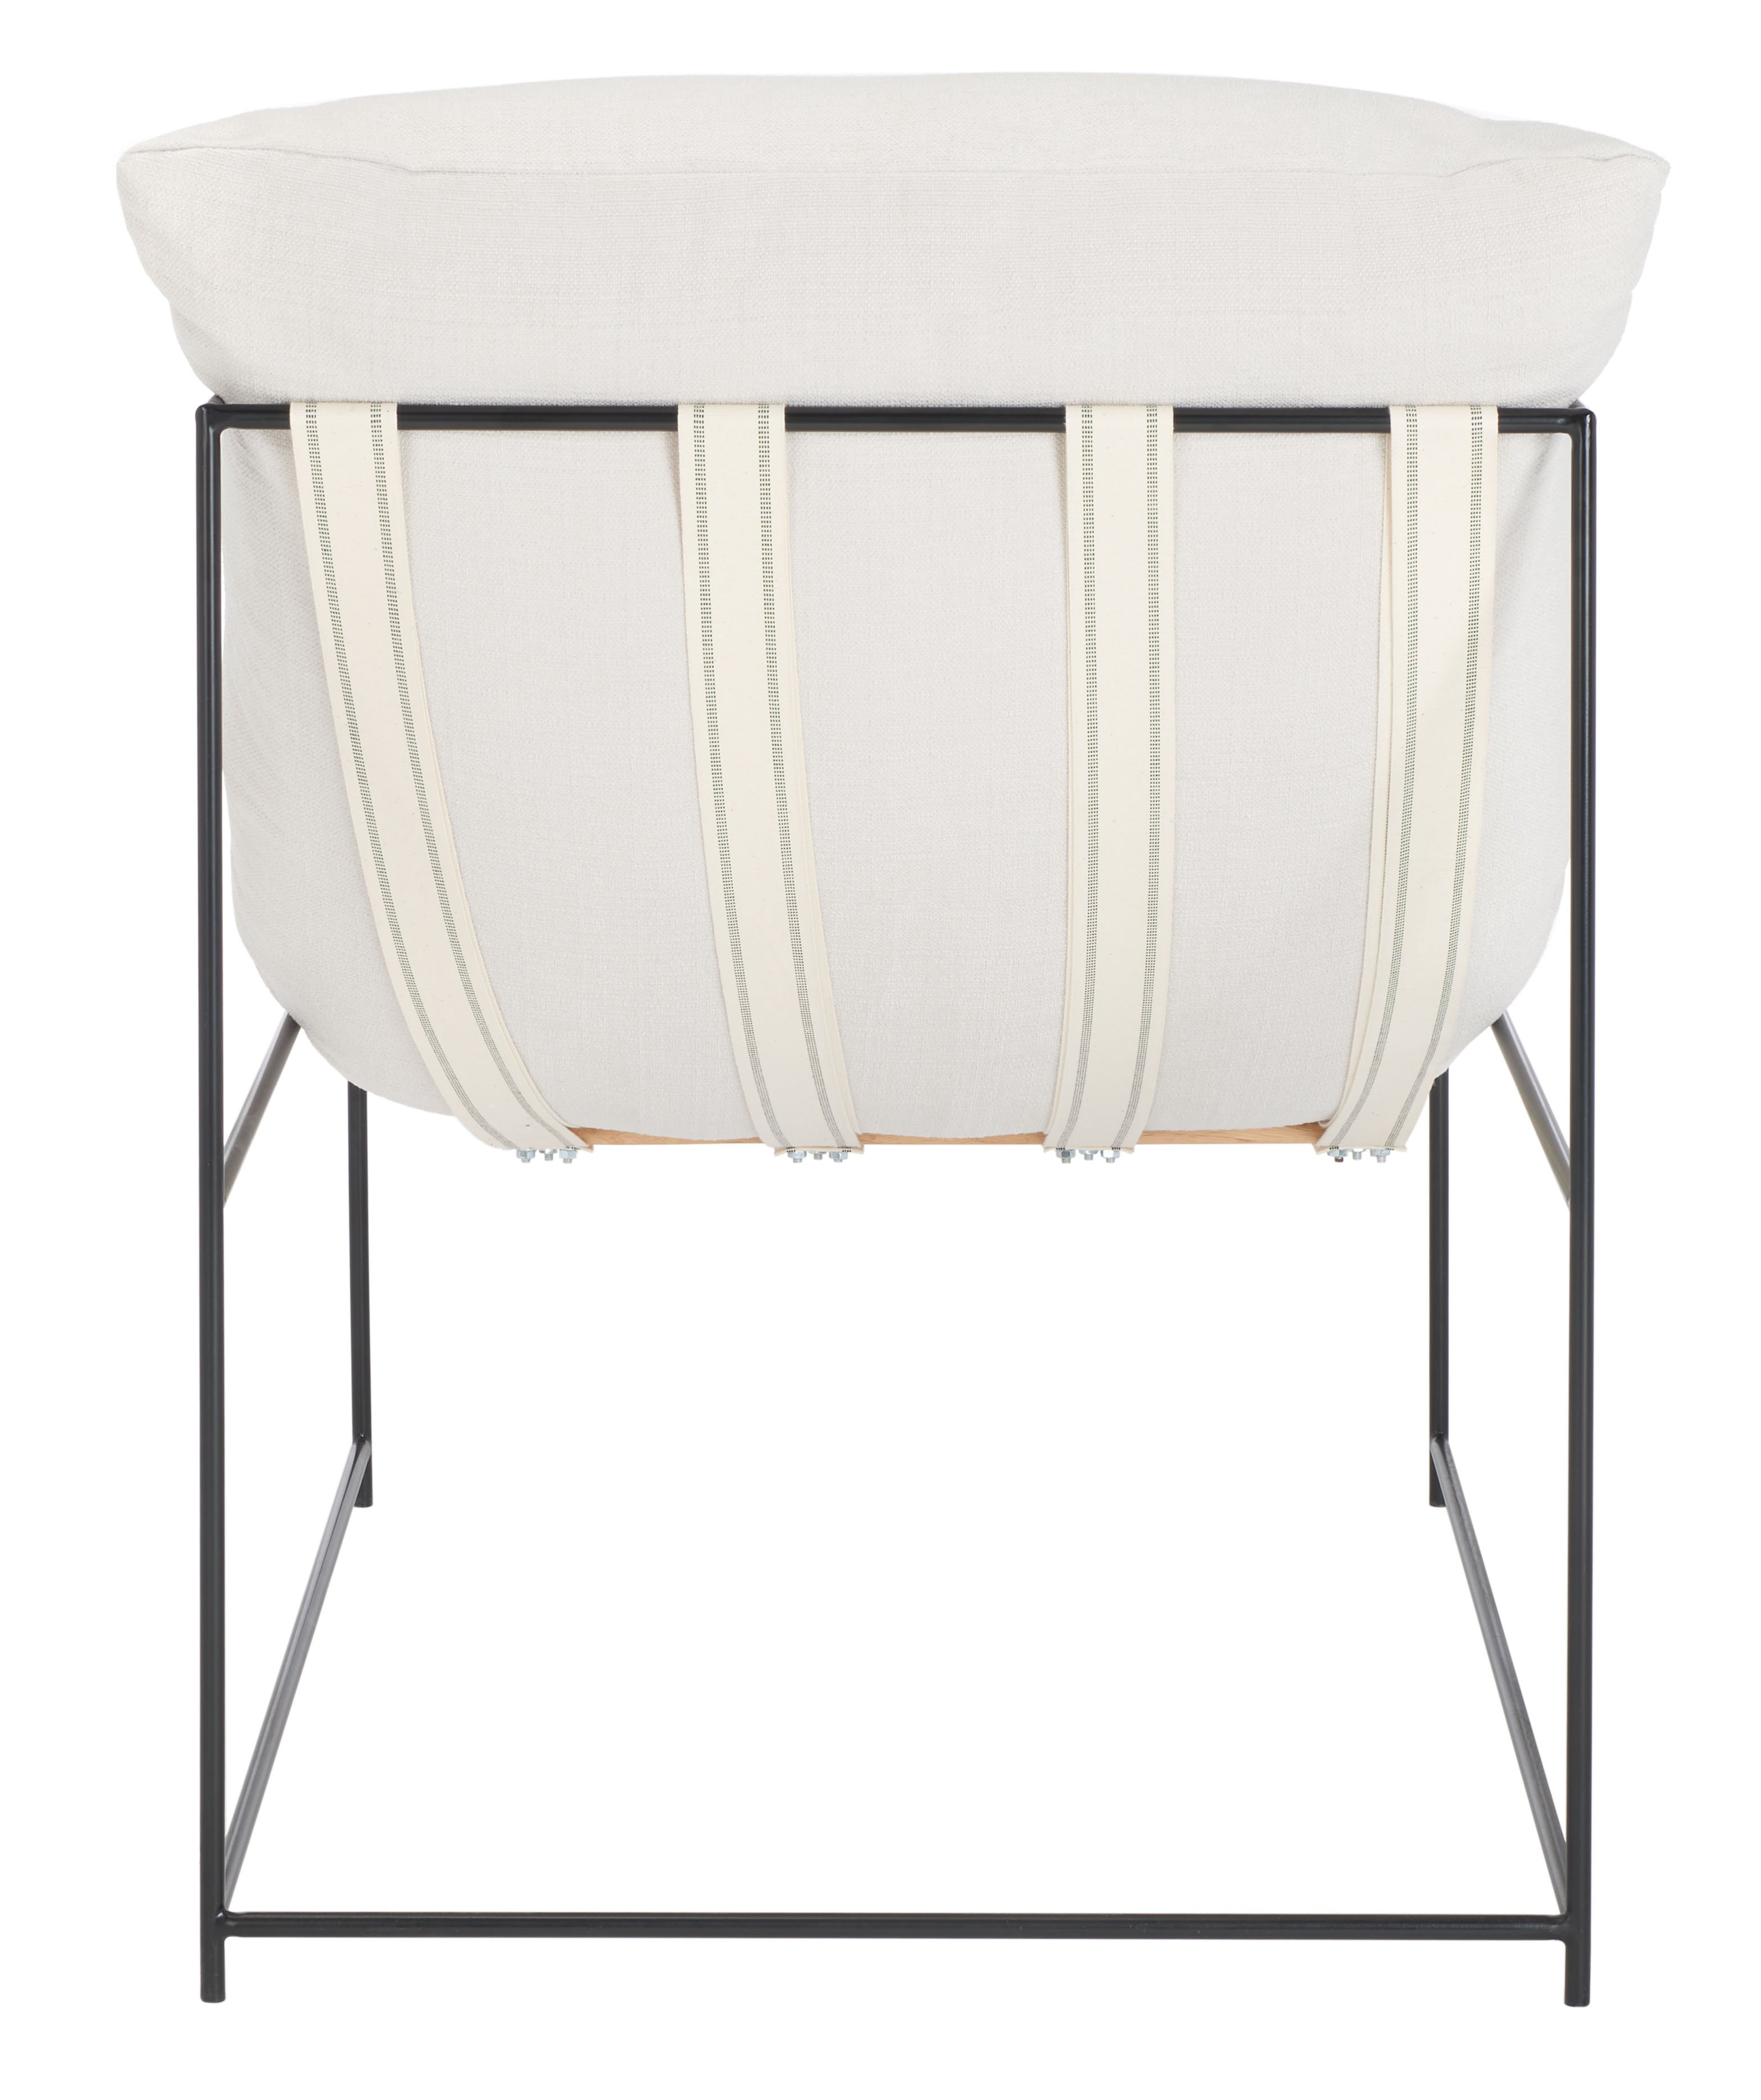 Portland Pillow Top Accent Chair - Ivory/Black - Safavieh - Image 4